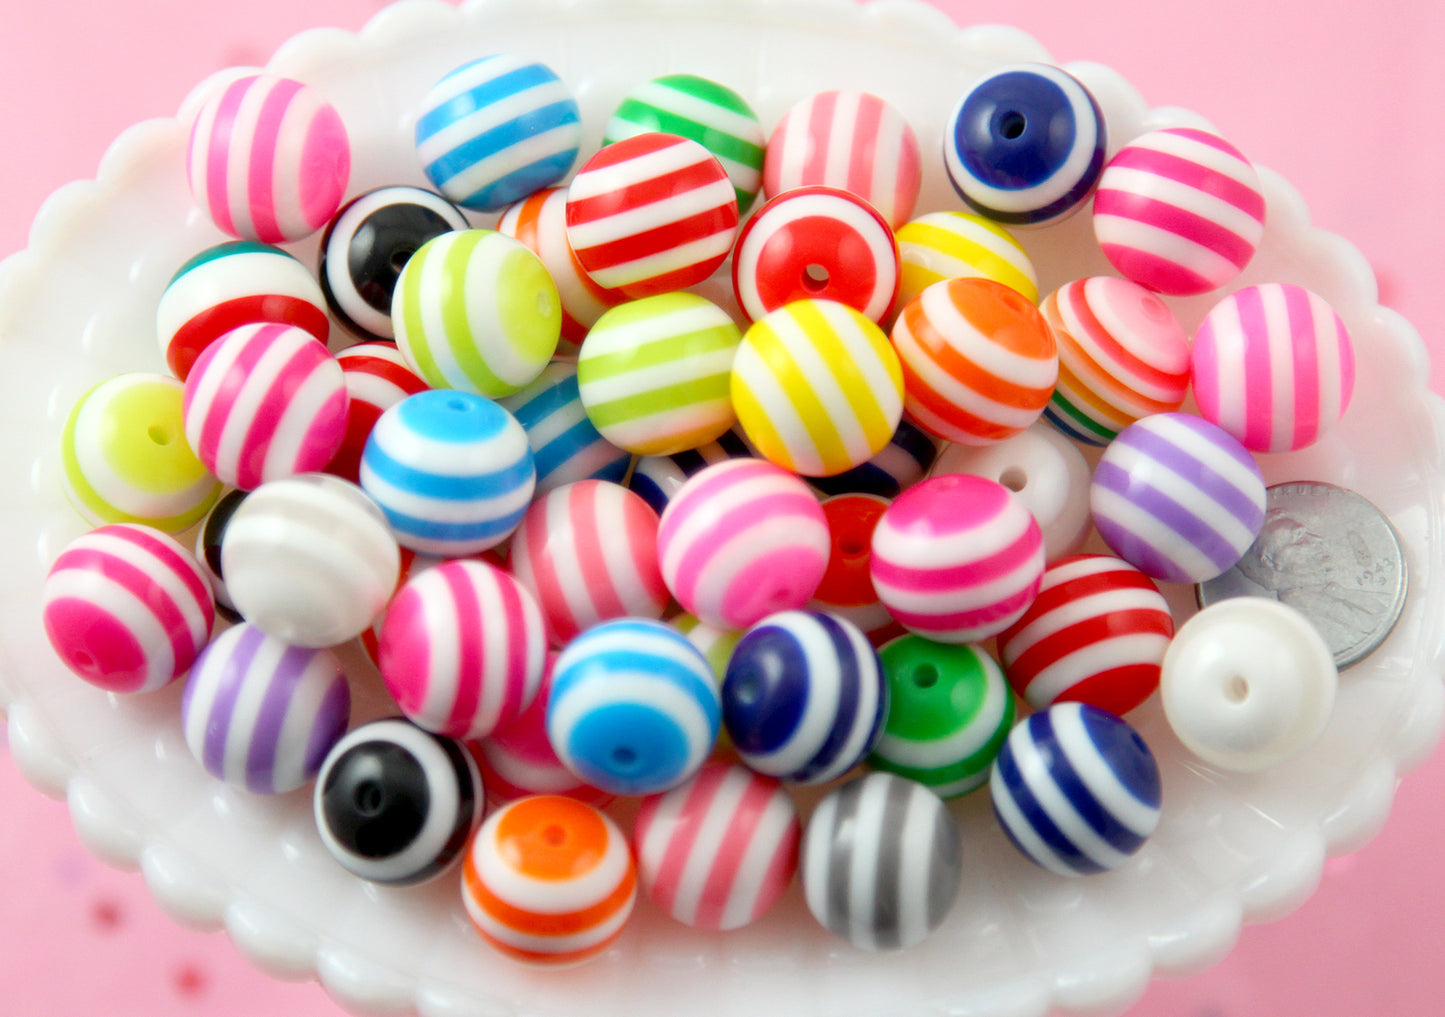 Stripe Resin Beads - 15mm Striped Resin Beads, mixed color - 15 pc set